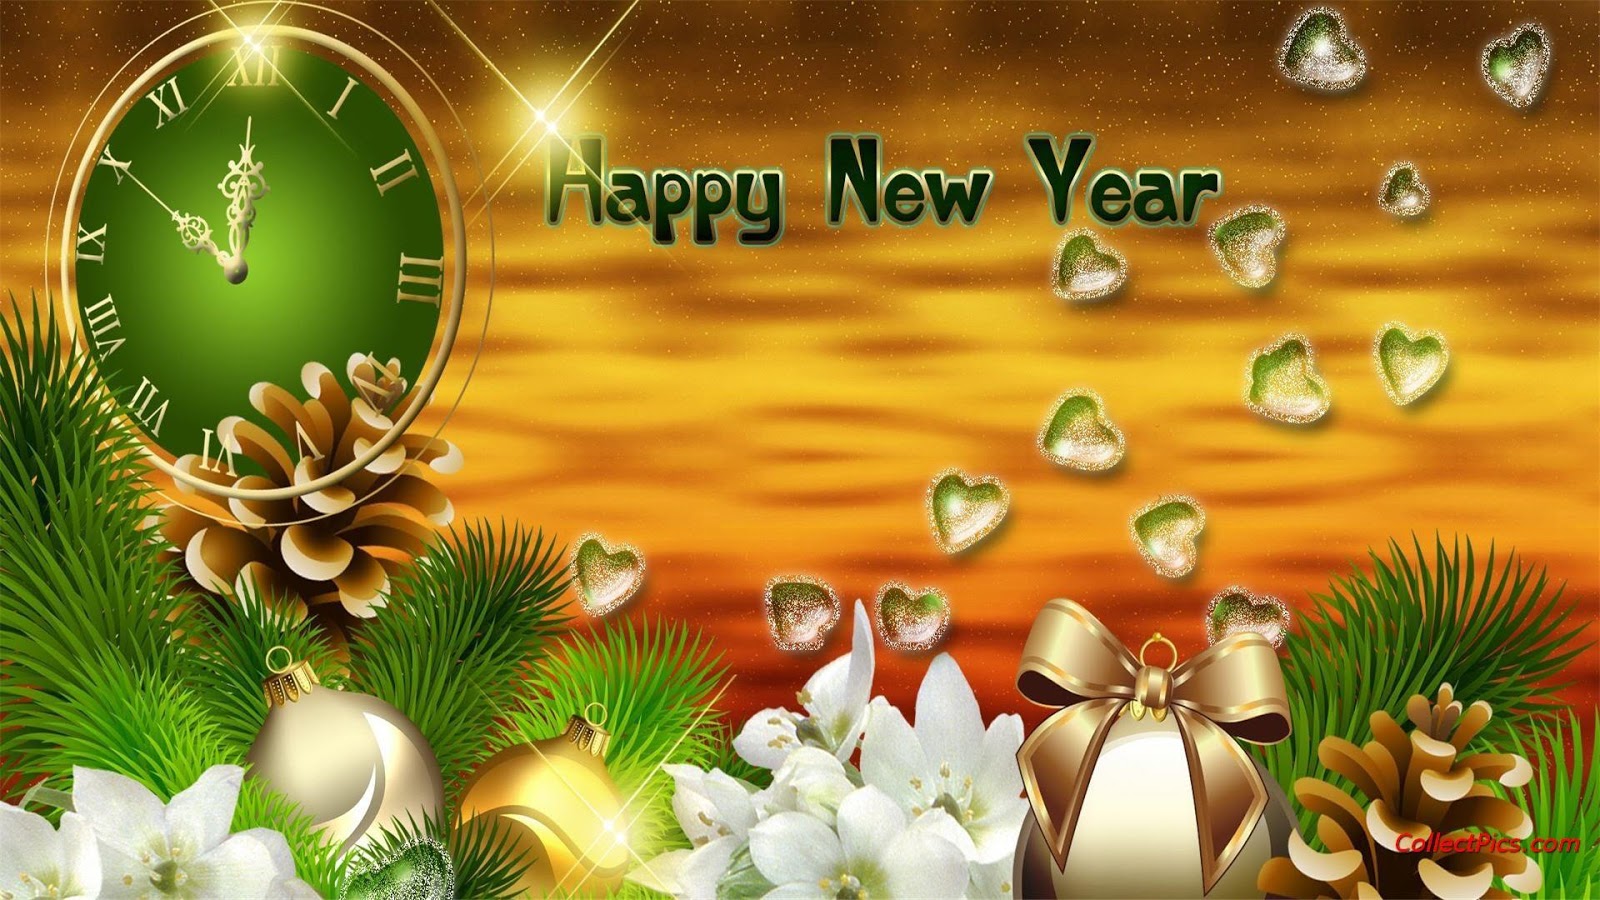 Best Collection Of Happy New Year Wallpaper In HD